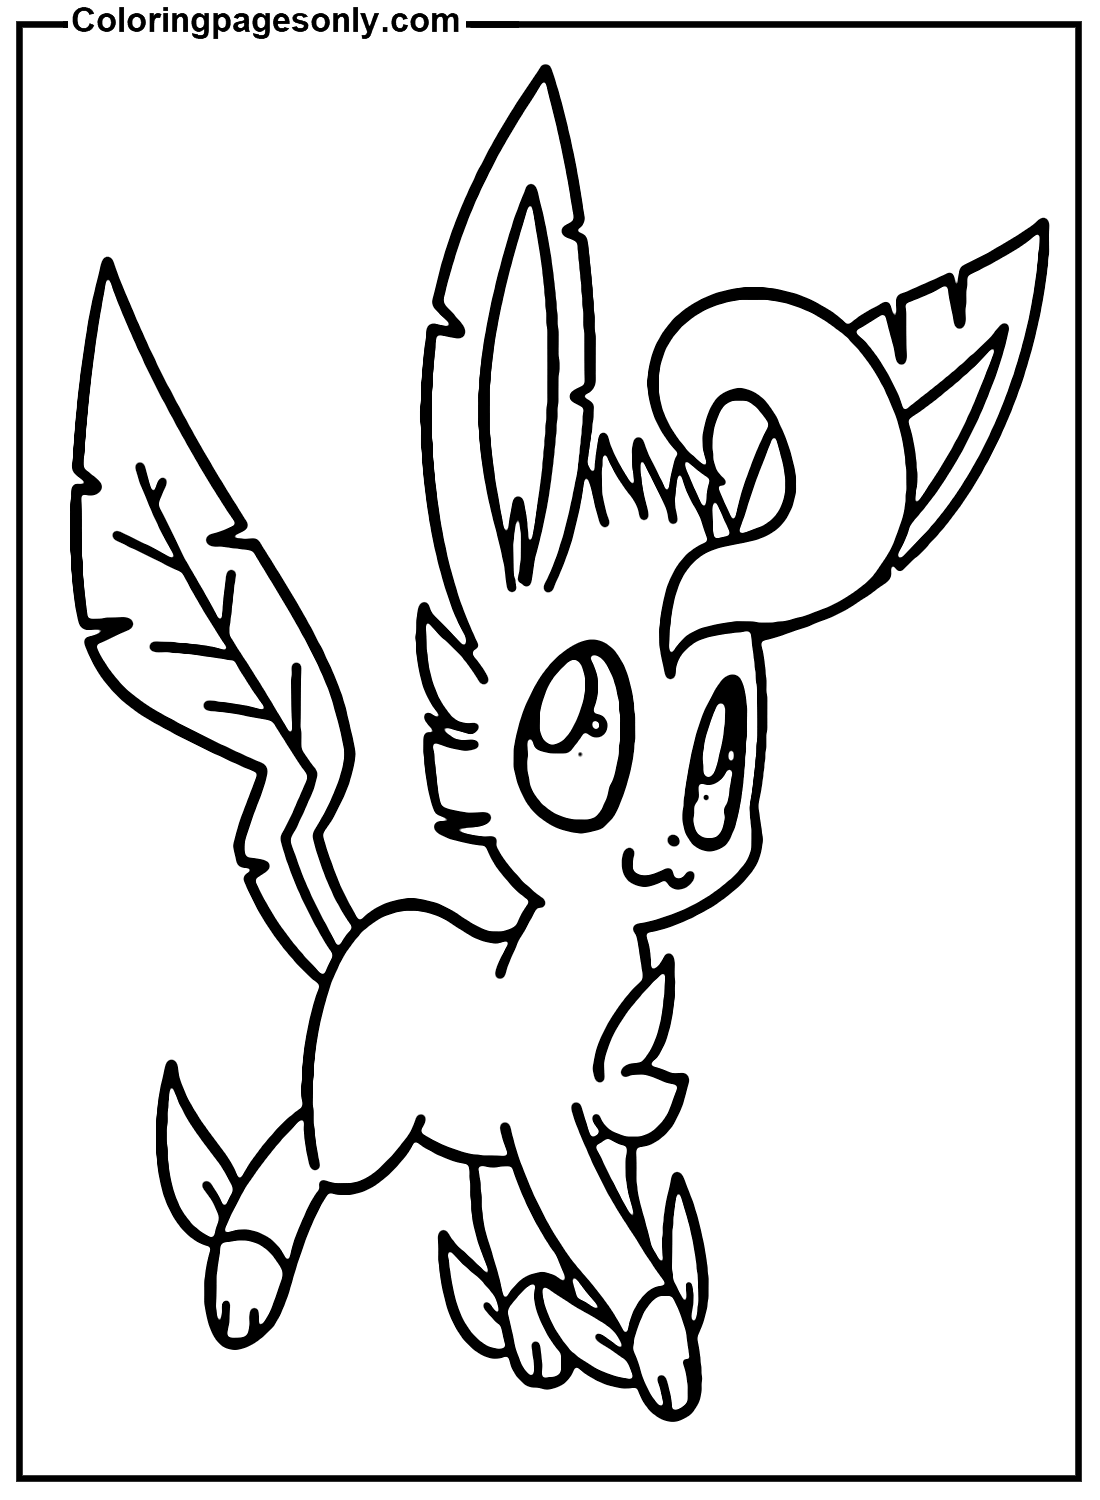 Adorable Leafeon from Leafeon